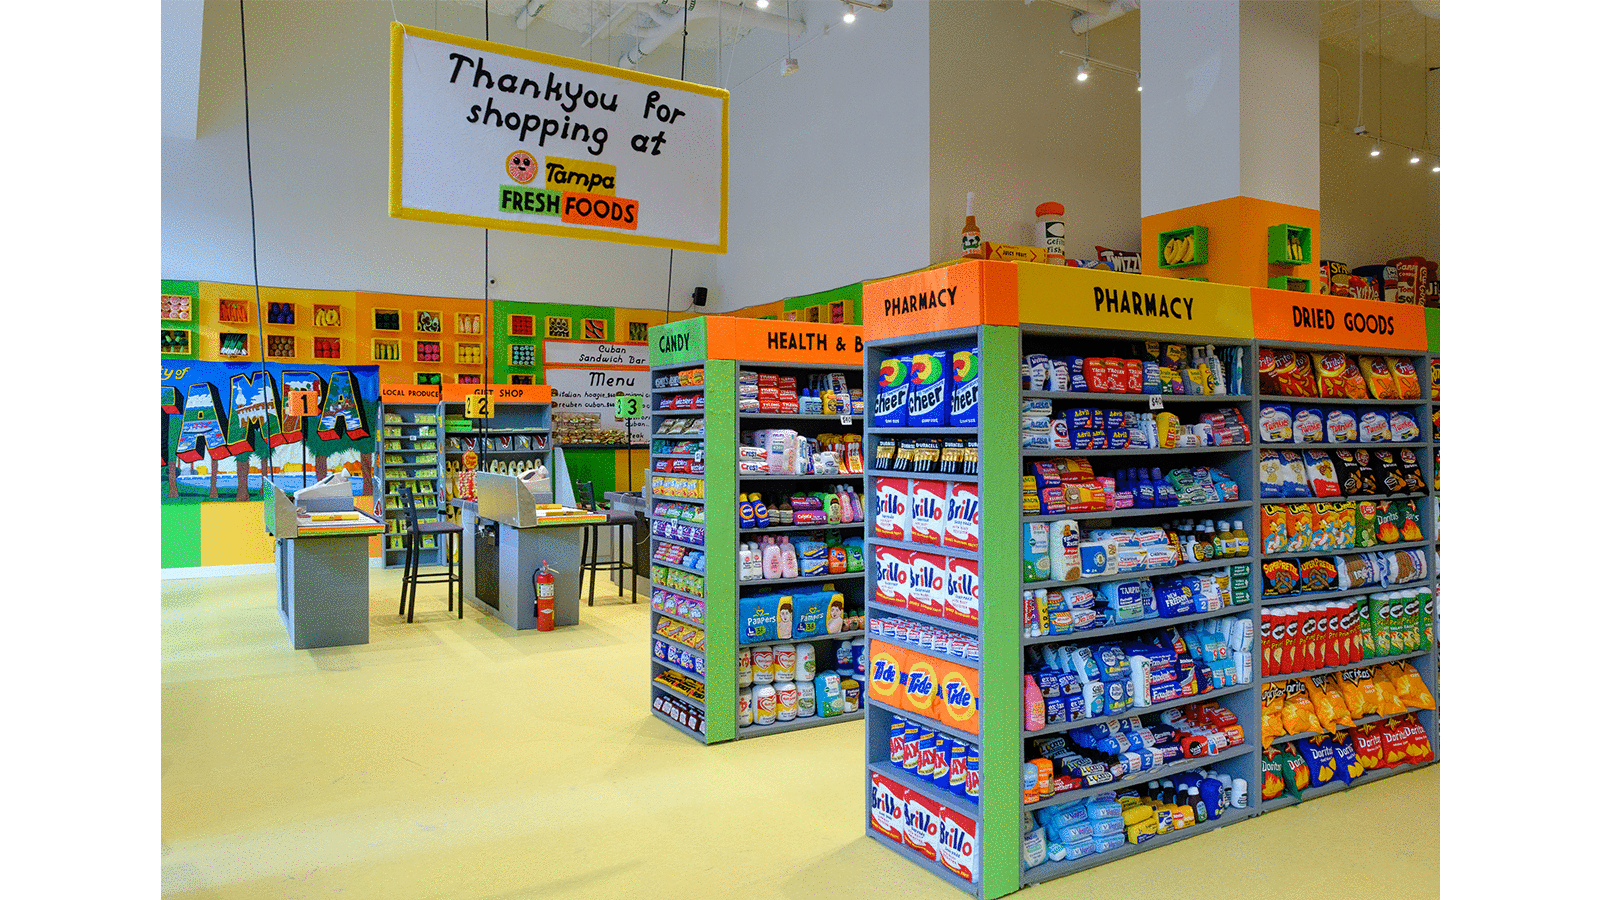 Immersive art experience, felt supermarket created by Lucy Sparrow